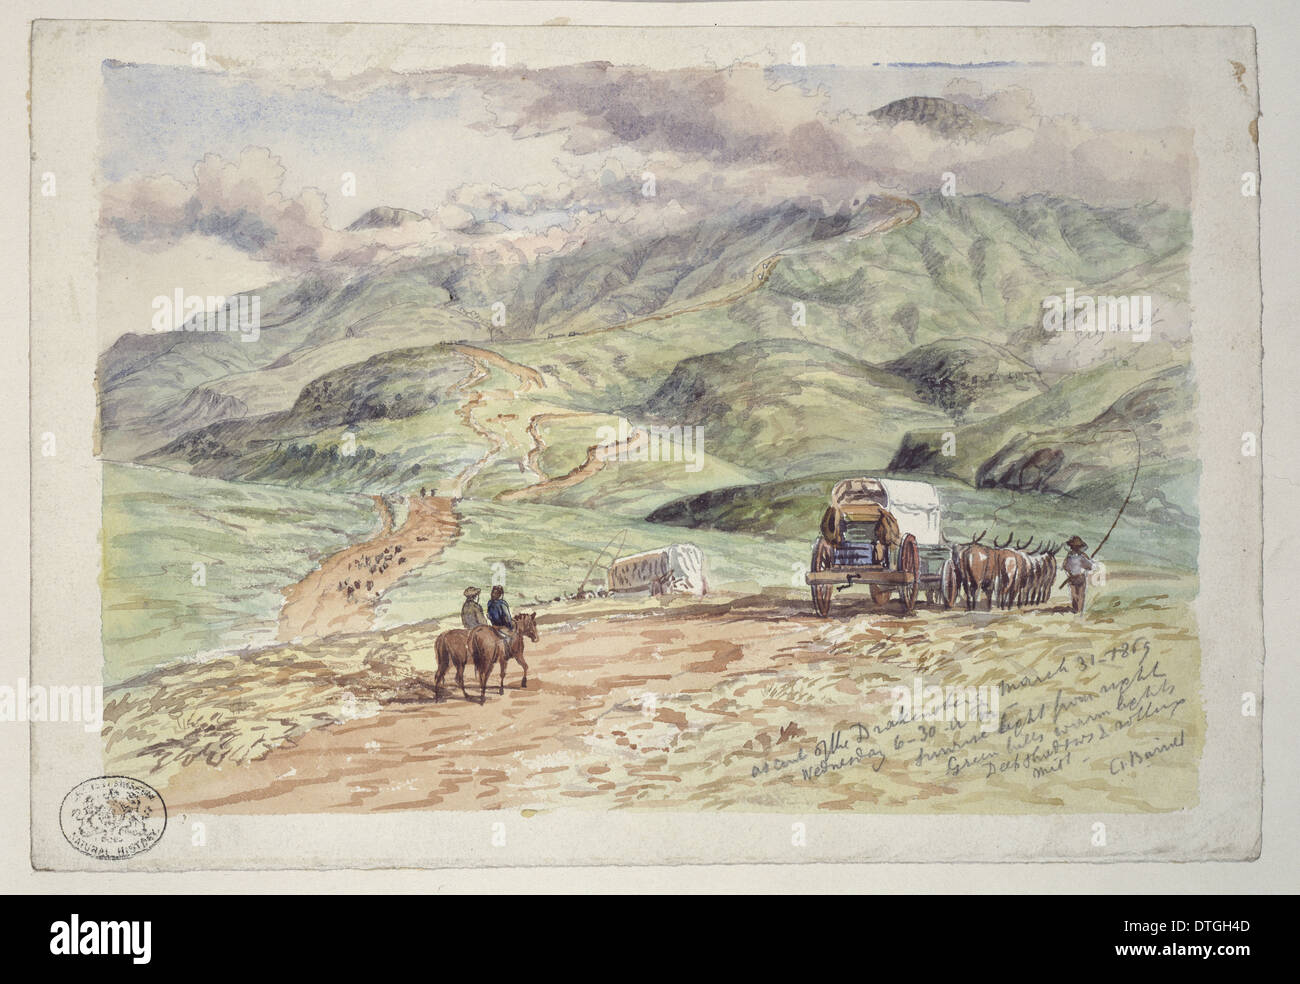 Ascent of the Drakensberg March 31, 1869 Stock Photo